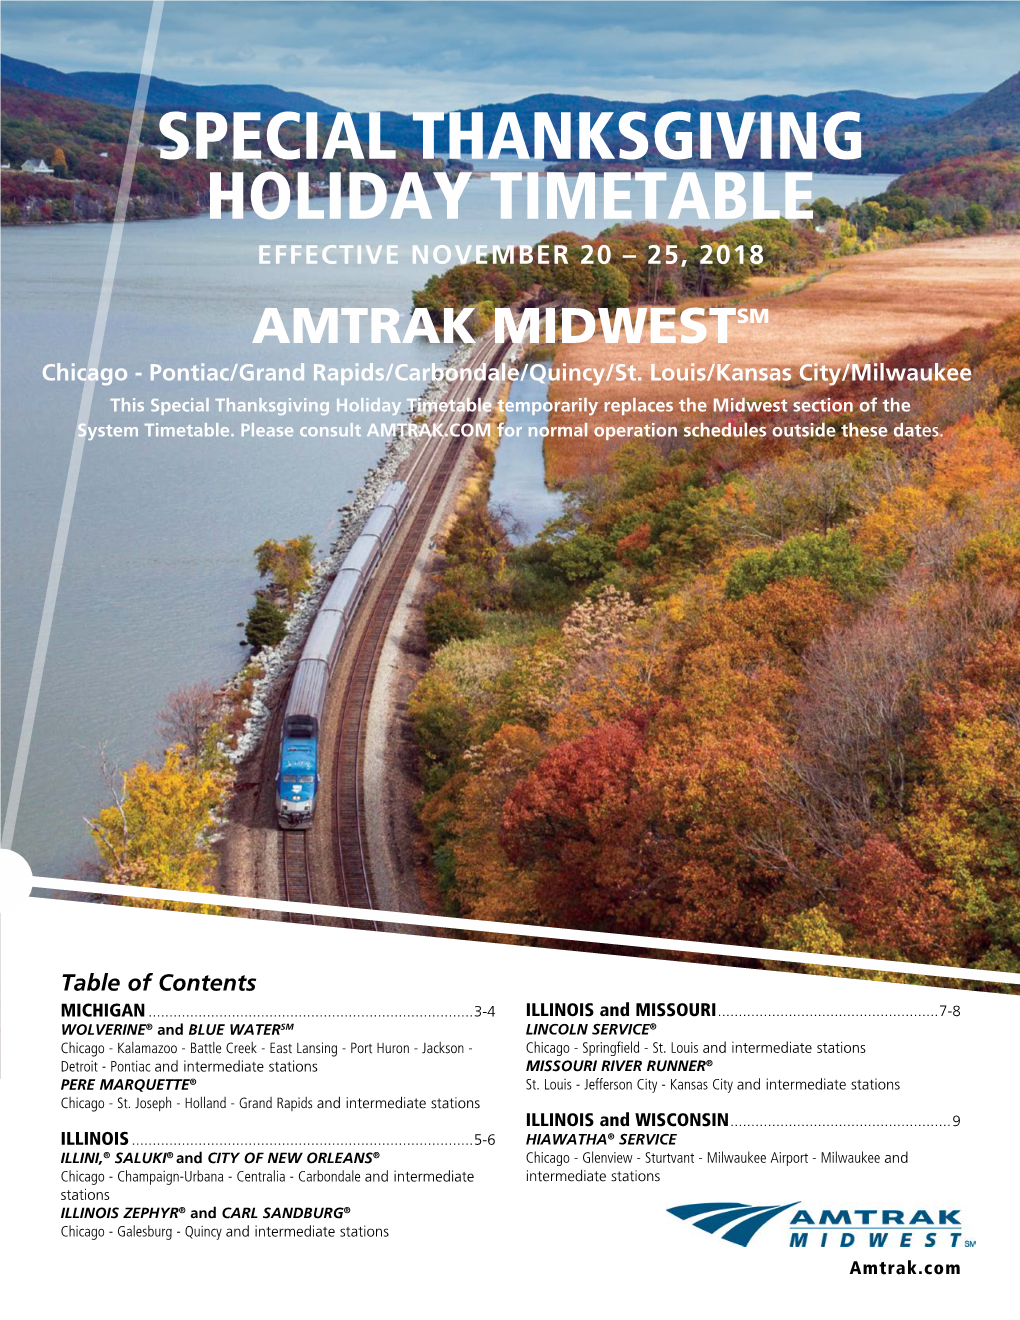 Amtrak Midwest Thanksgiving Timetable-Chicago-St. Louis